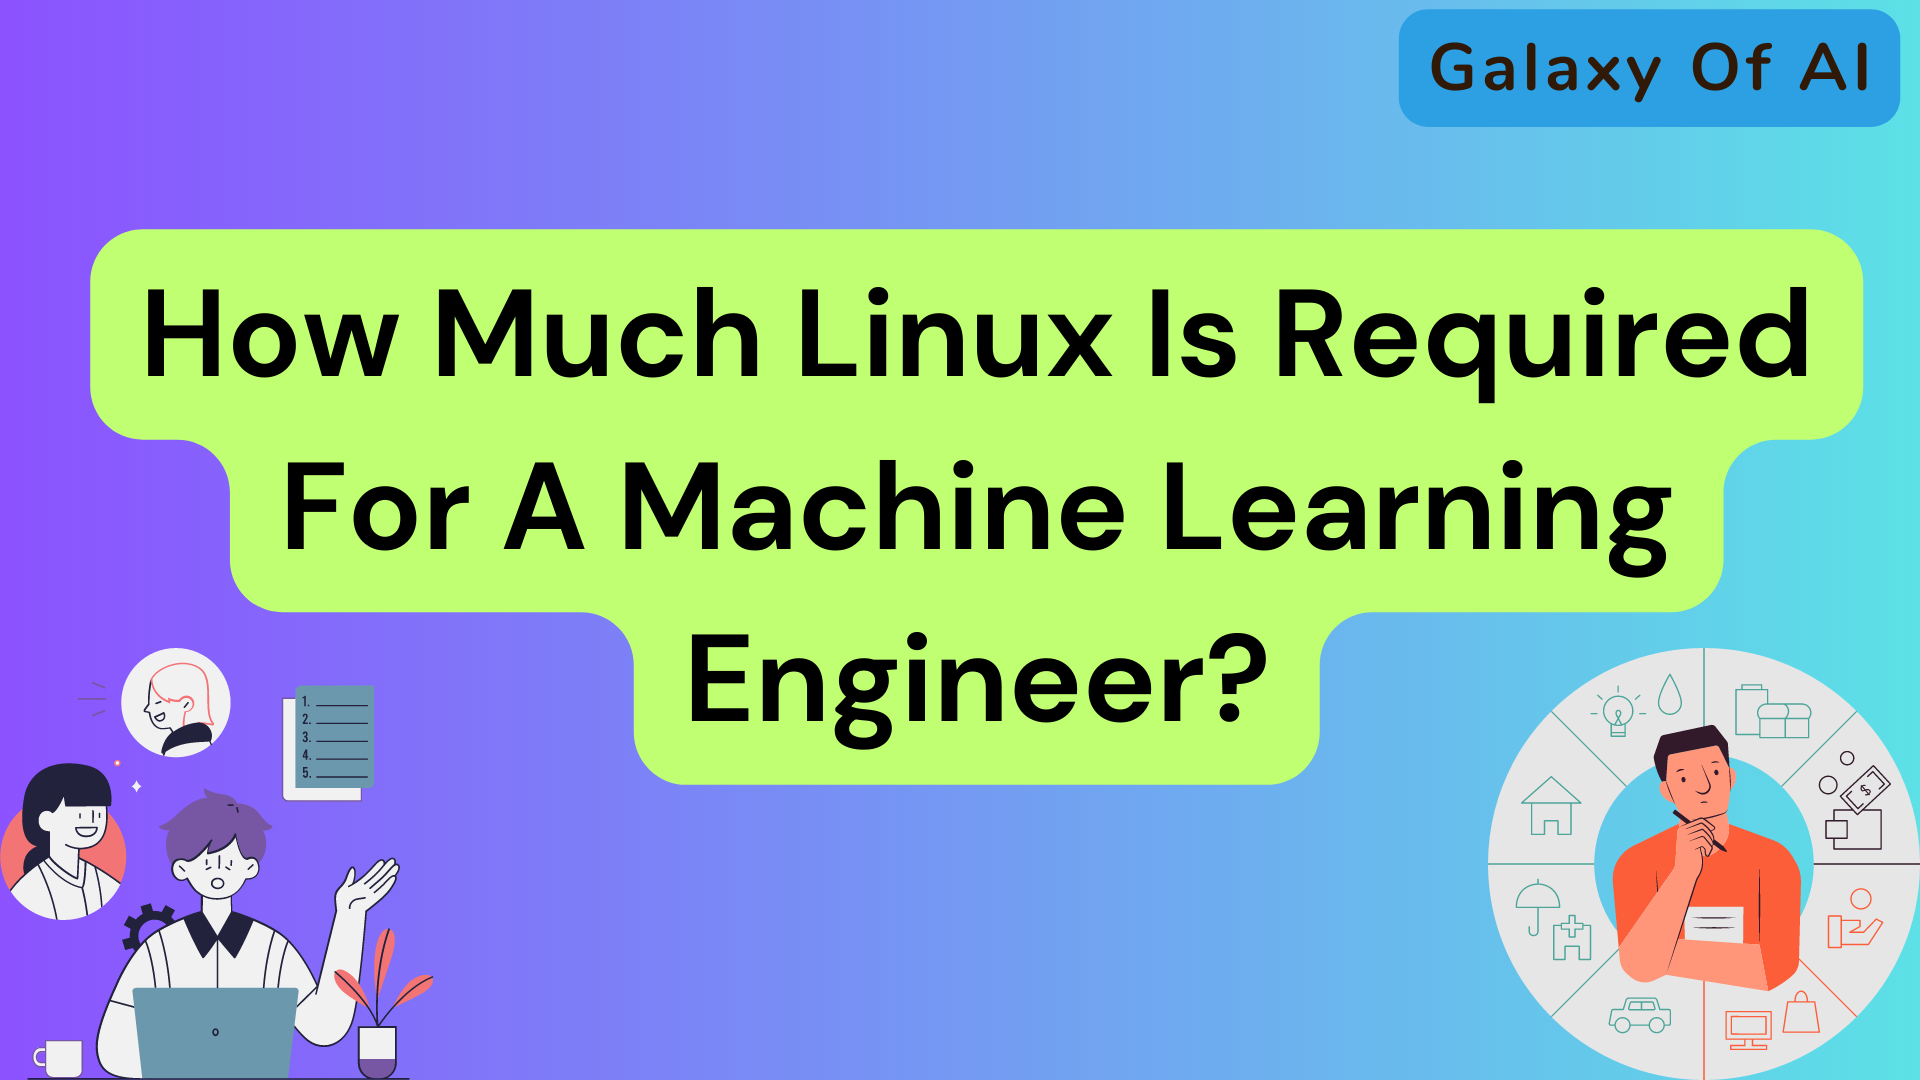 How Much Linux Is Required For A Machine Learning Engineer?